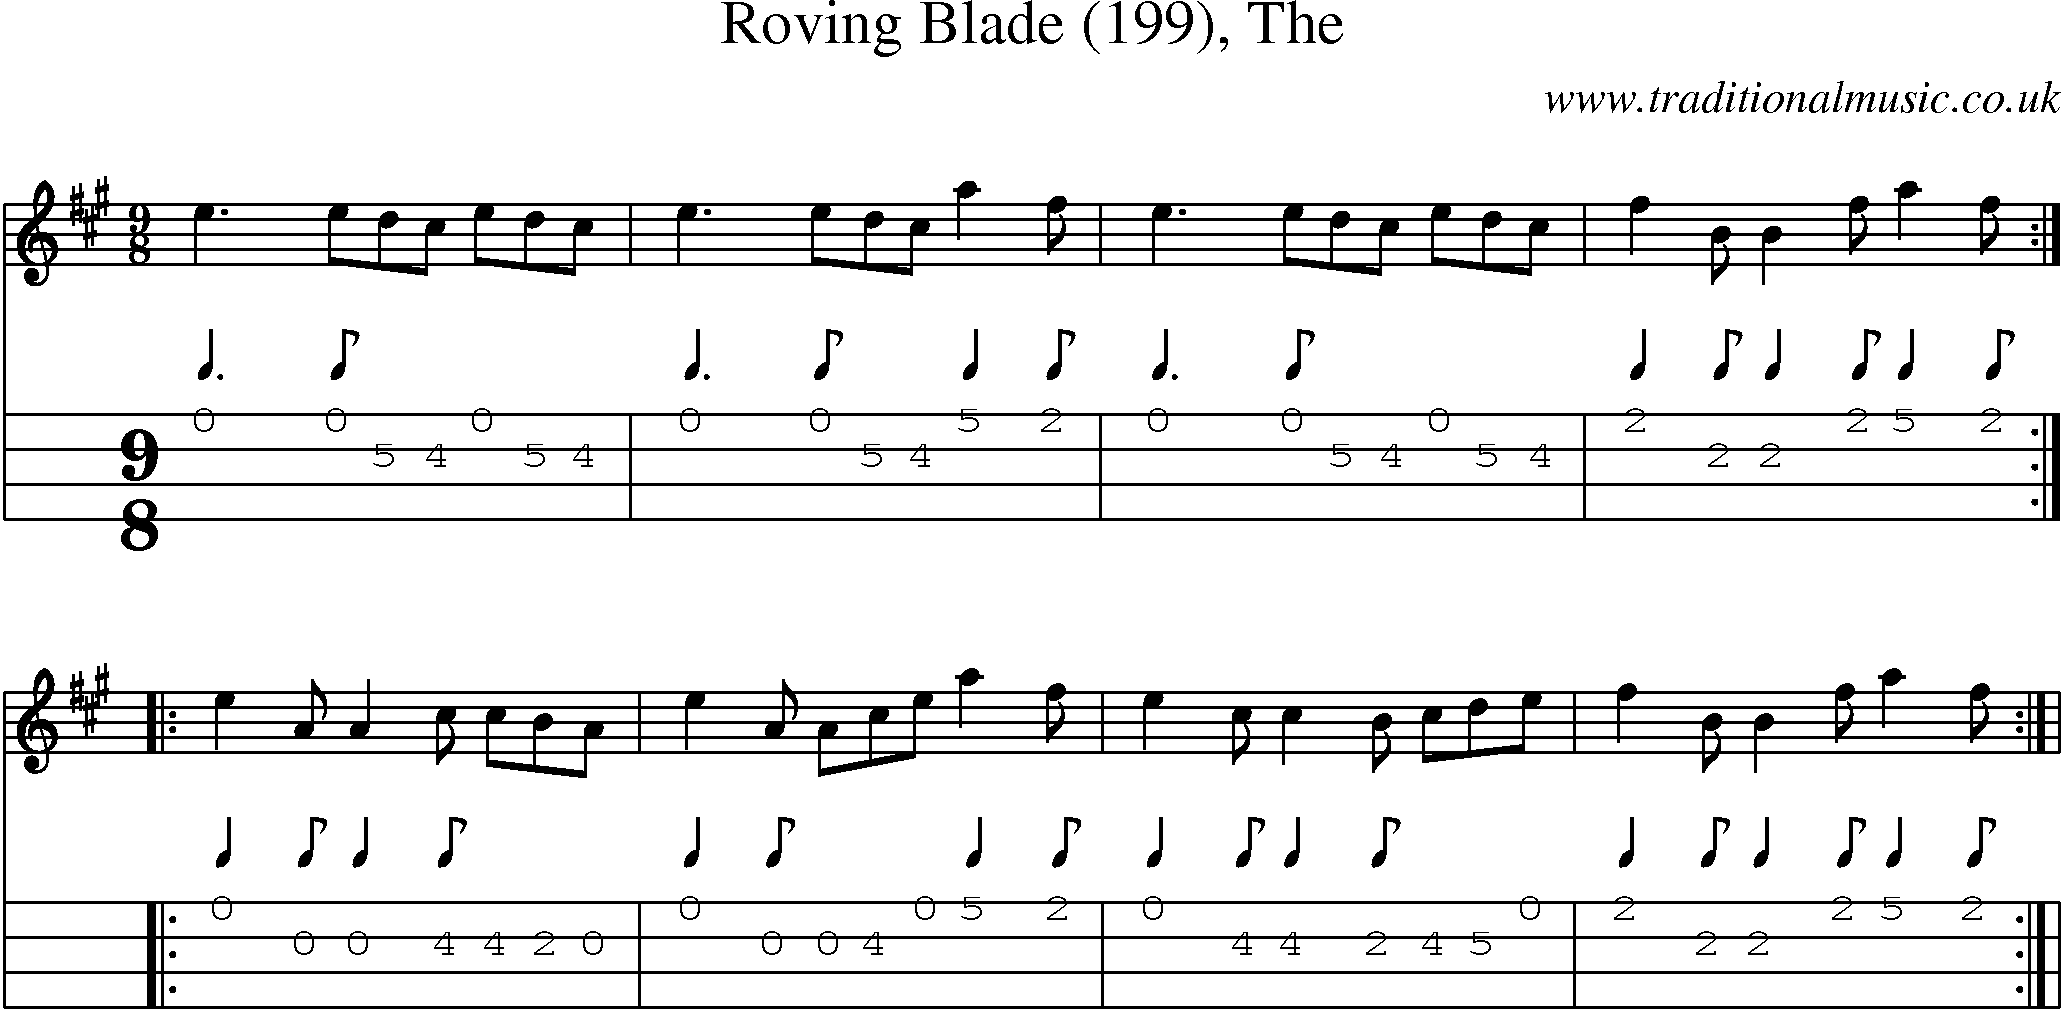 Music Score and Mandolin Tabs for Roving Blade (199)